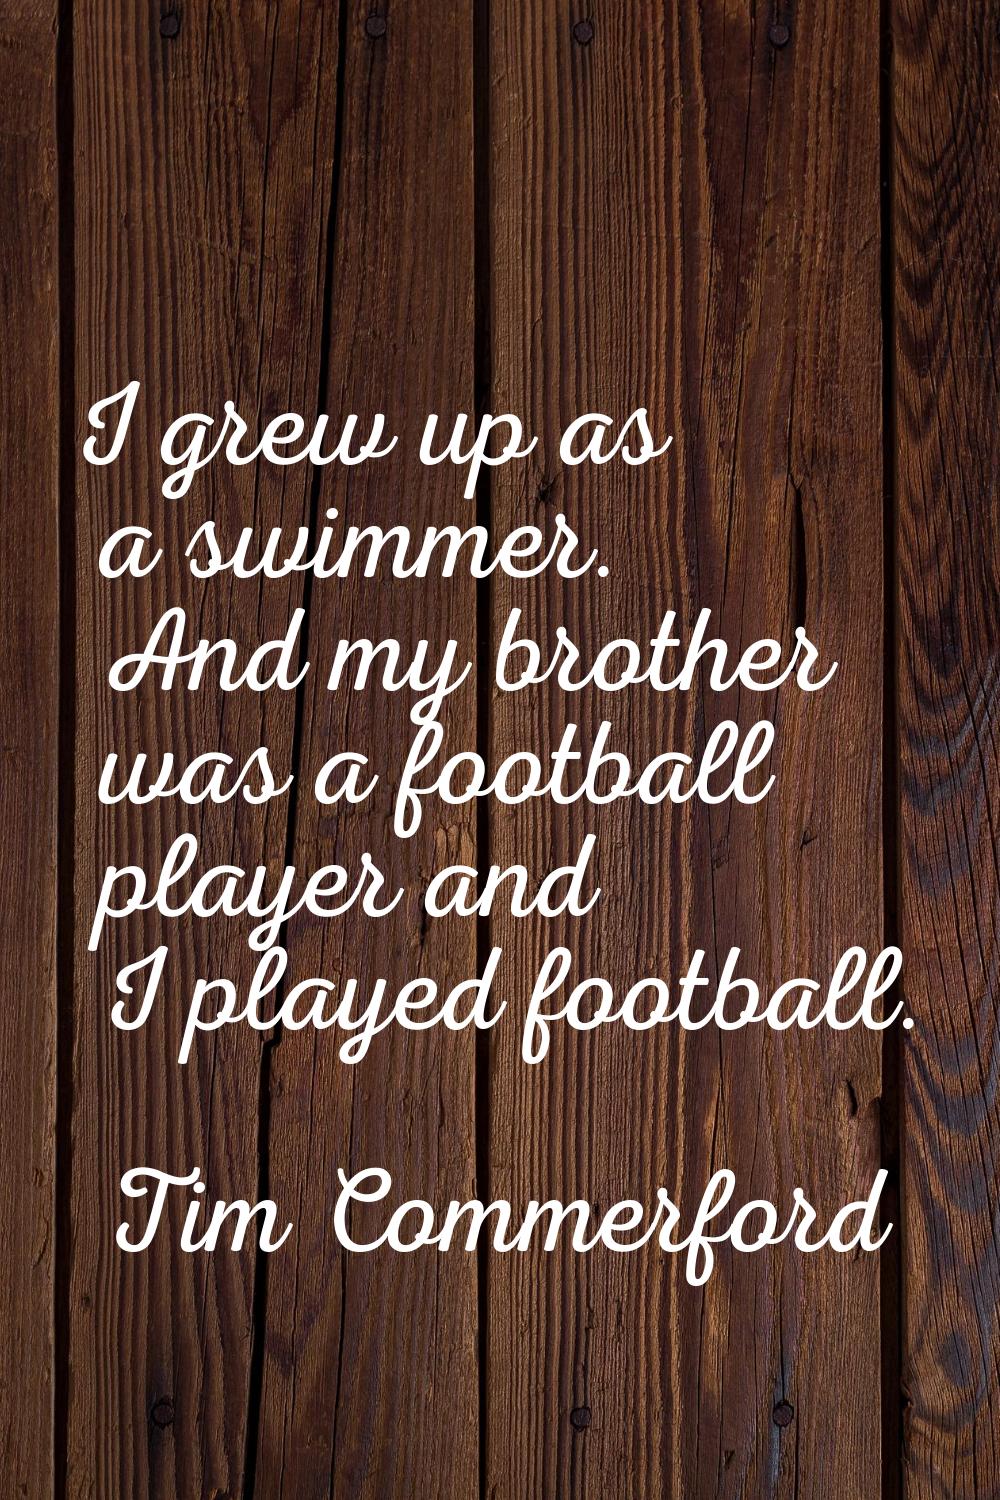 I grew up as a swimmer. And my brother was a football player and I played football.